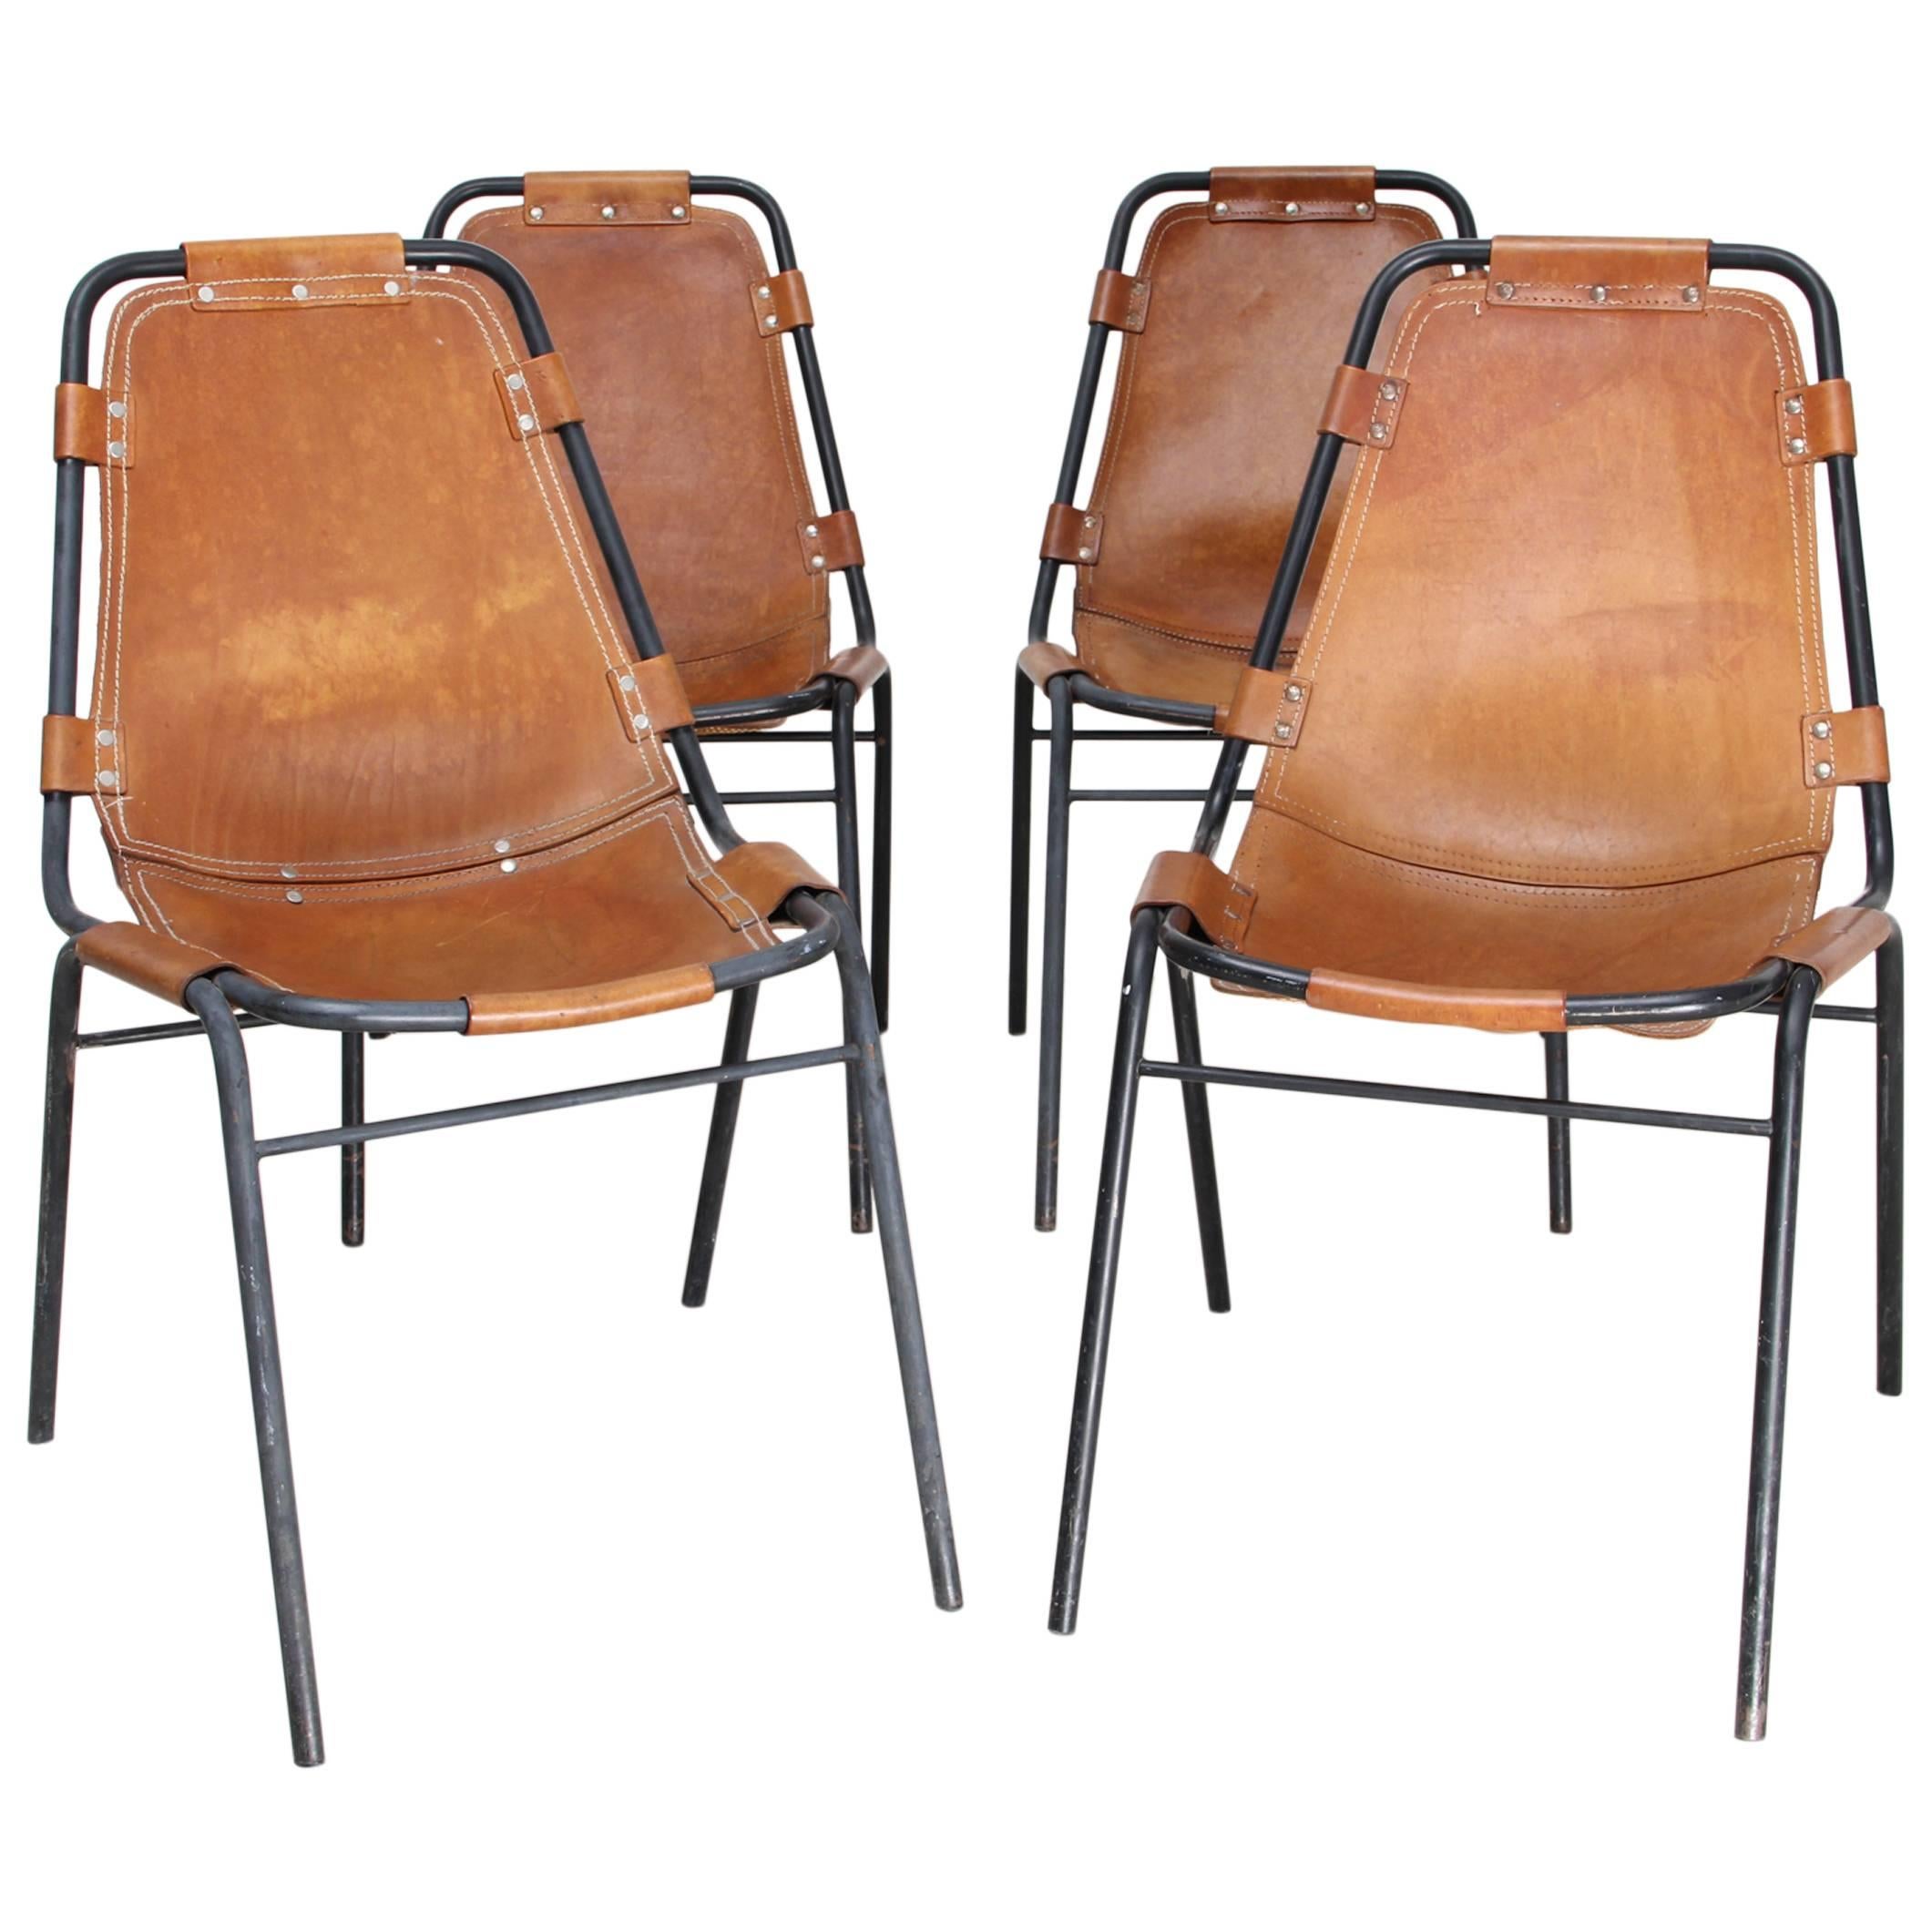 1960s Set of Four Chairs chosen by Charlotte Perriand